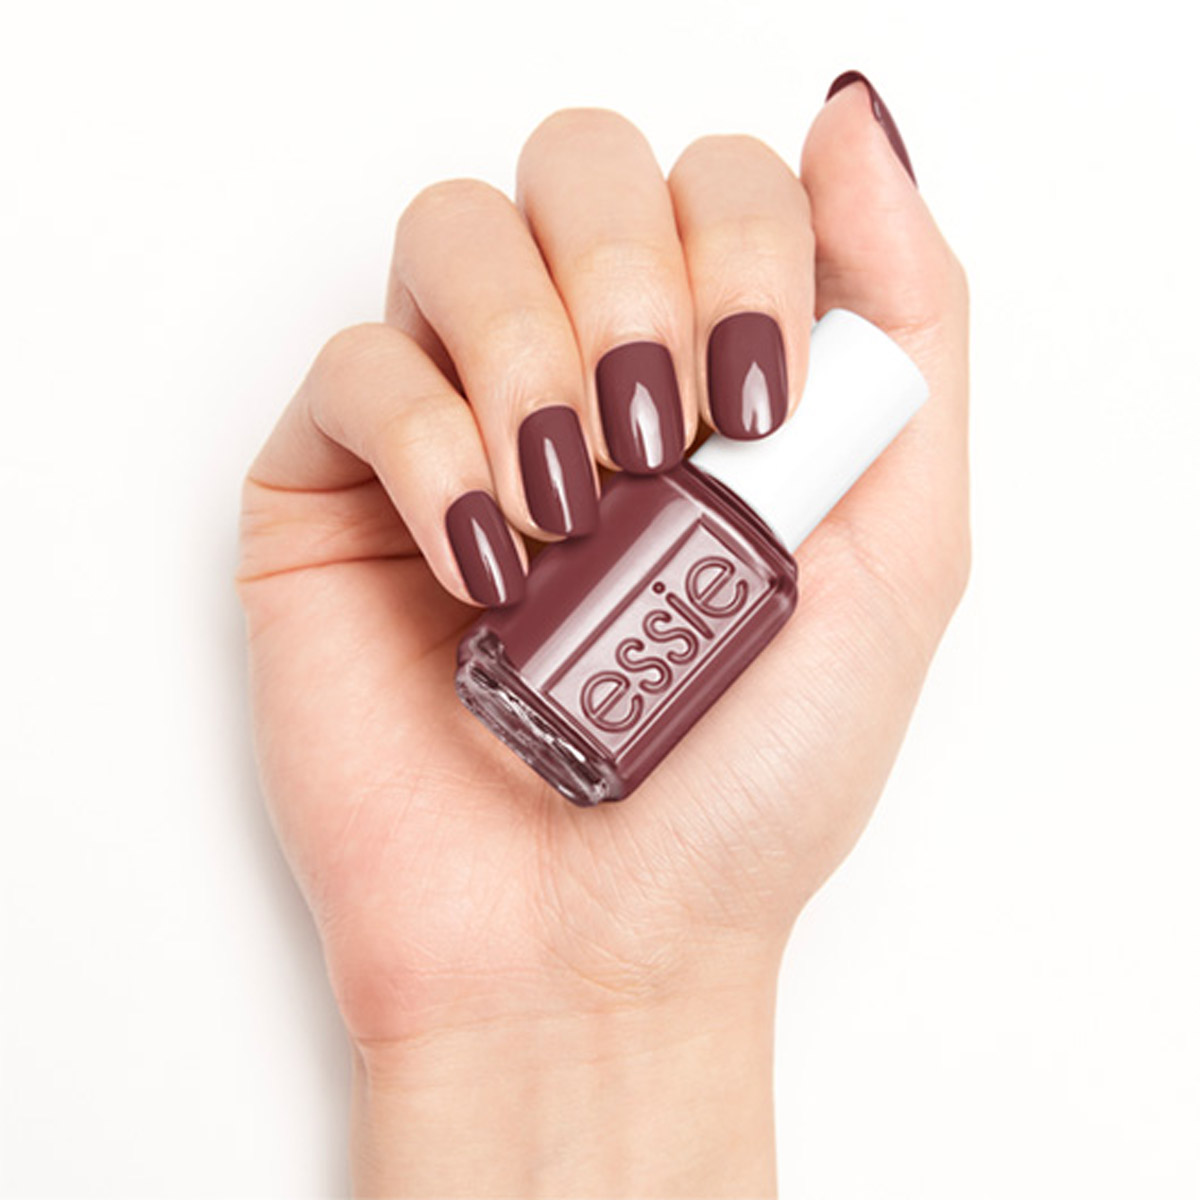 ESSIE-enamel-rooting-for-you-Hand-1-530